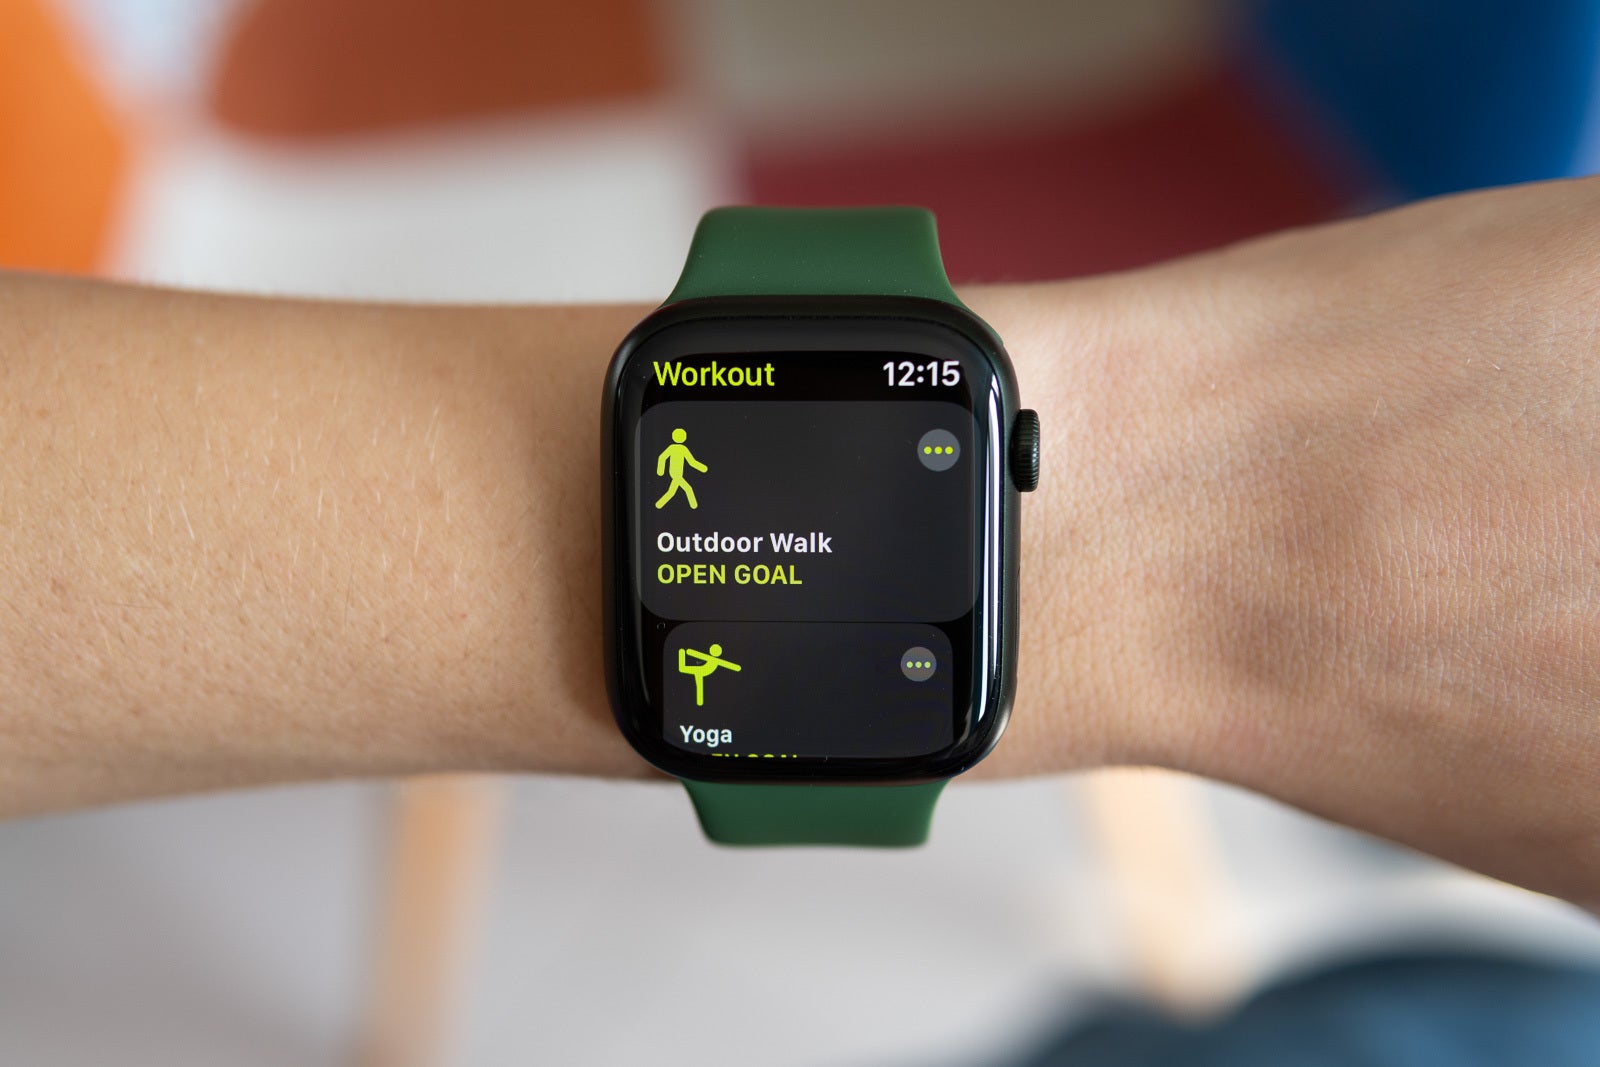 Apple Watch Series 7 workouts - Apple Watch Series 7 Review